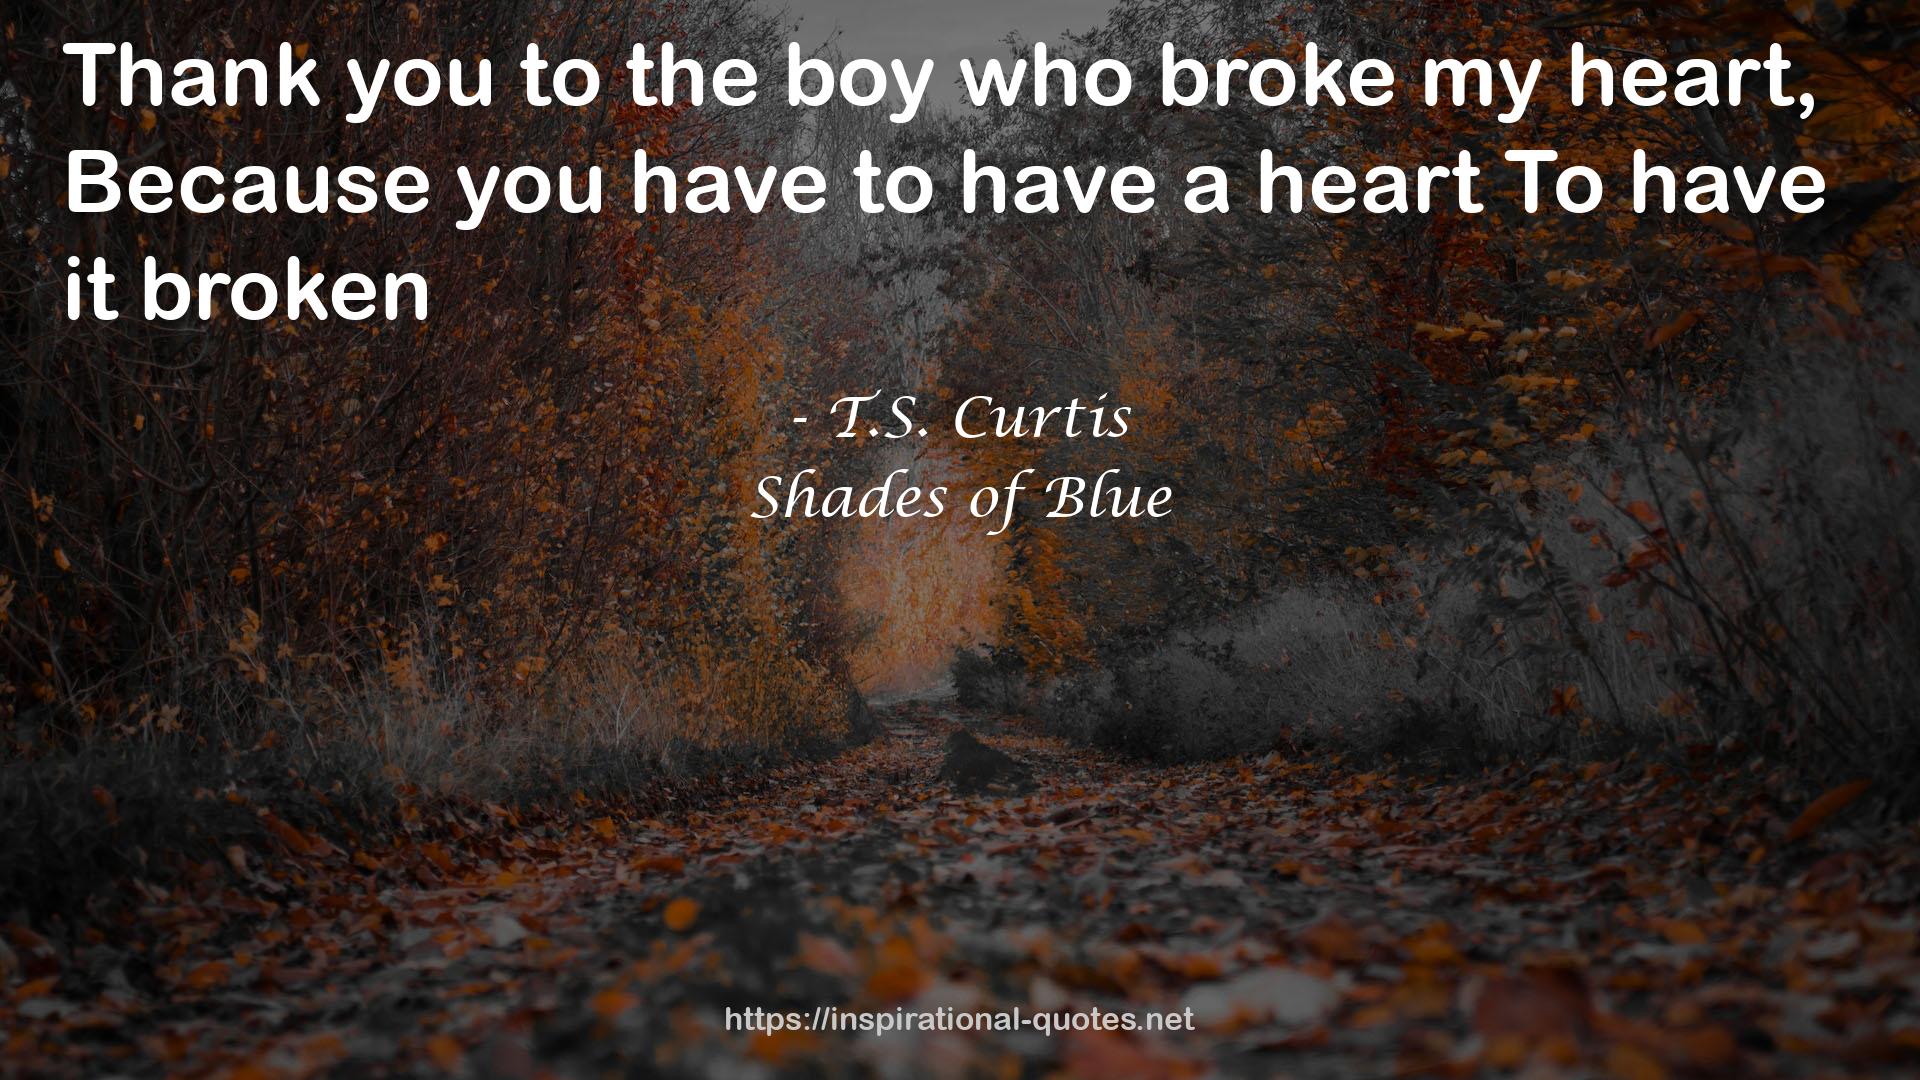 Shades of Blue QUOTES